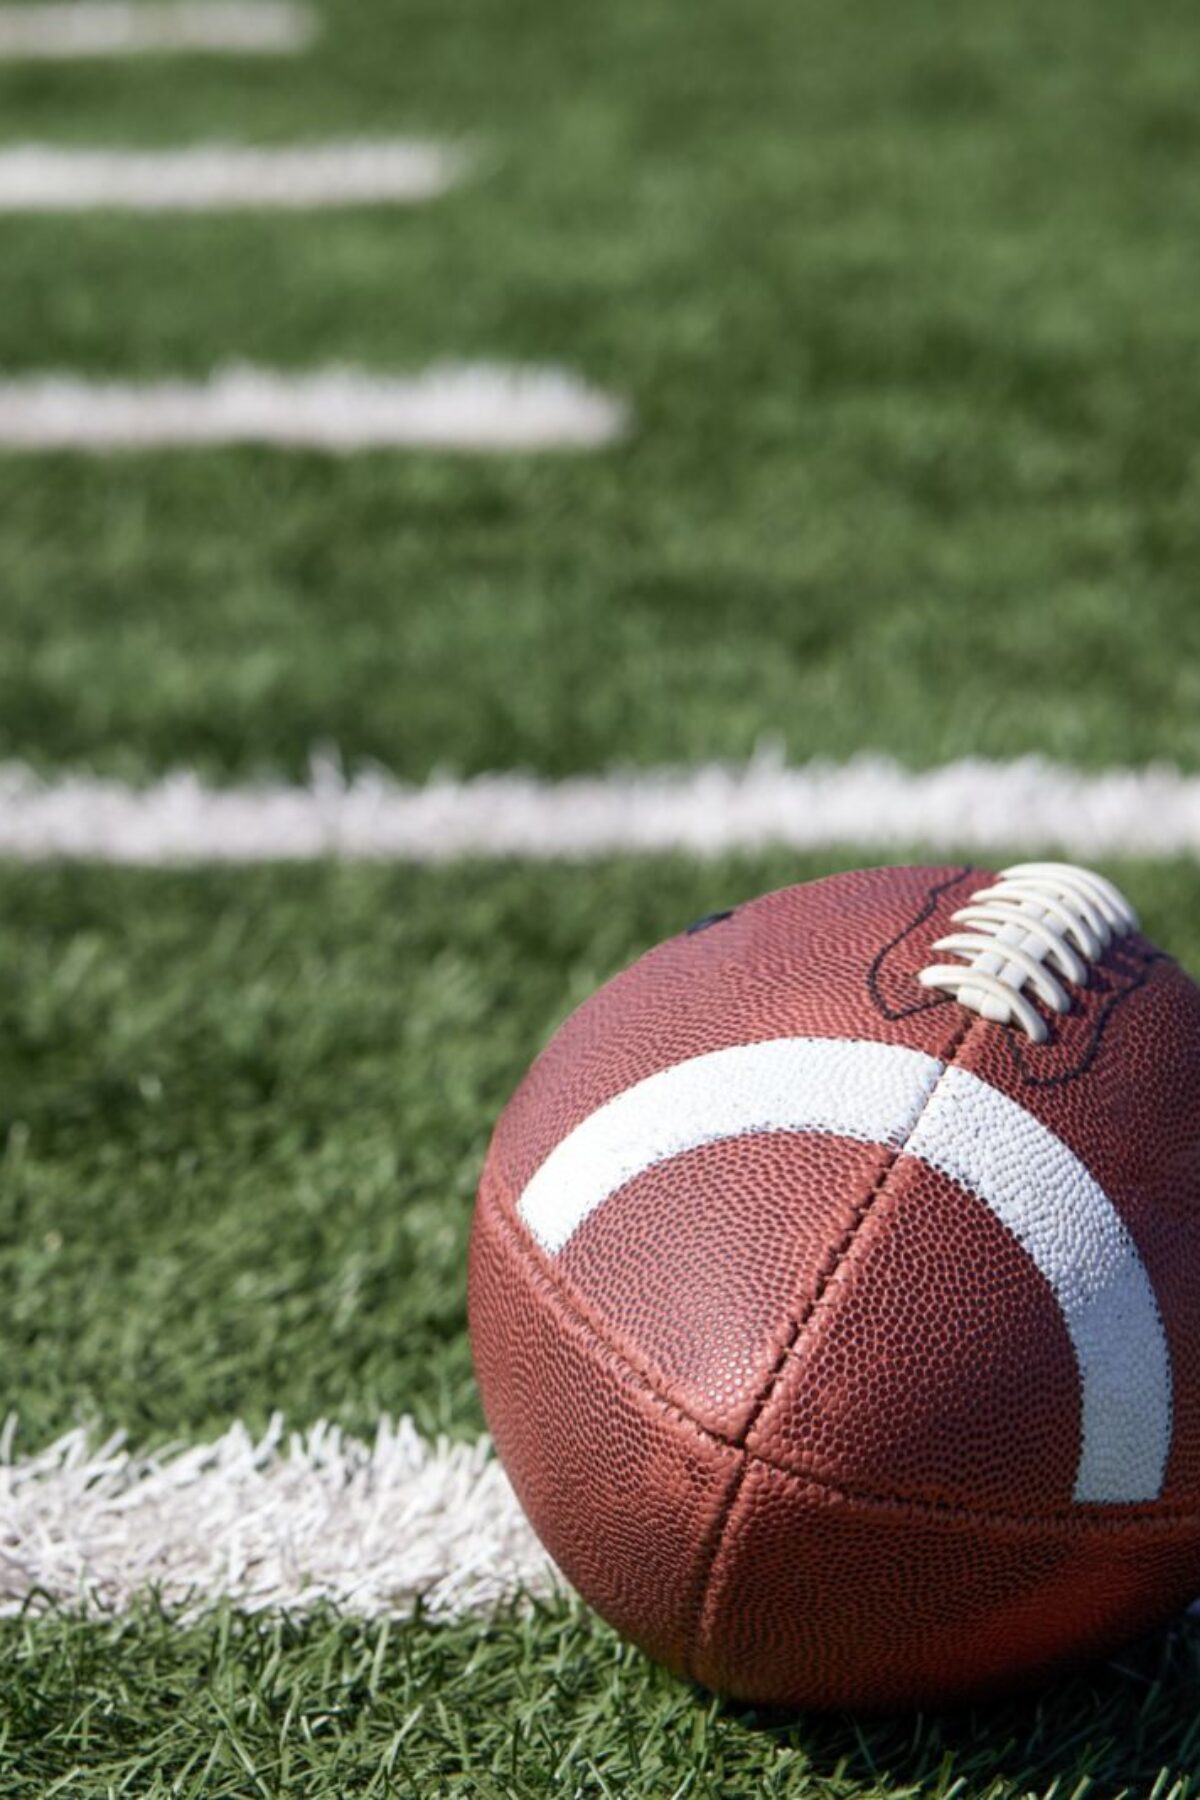 American football ball at yard line markers on playing field - stock photo